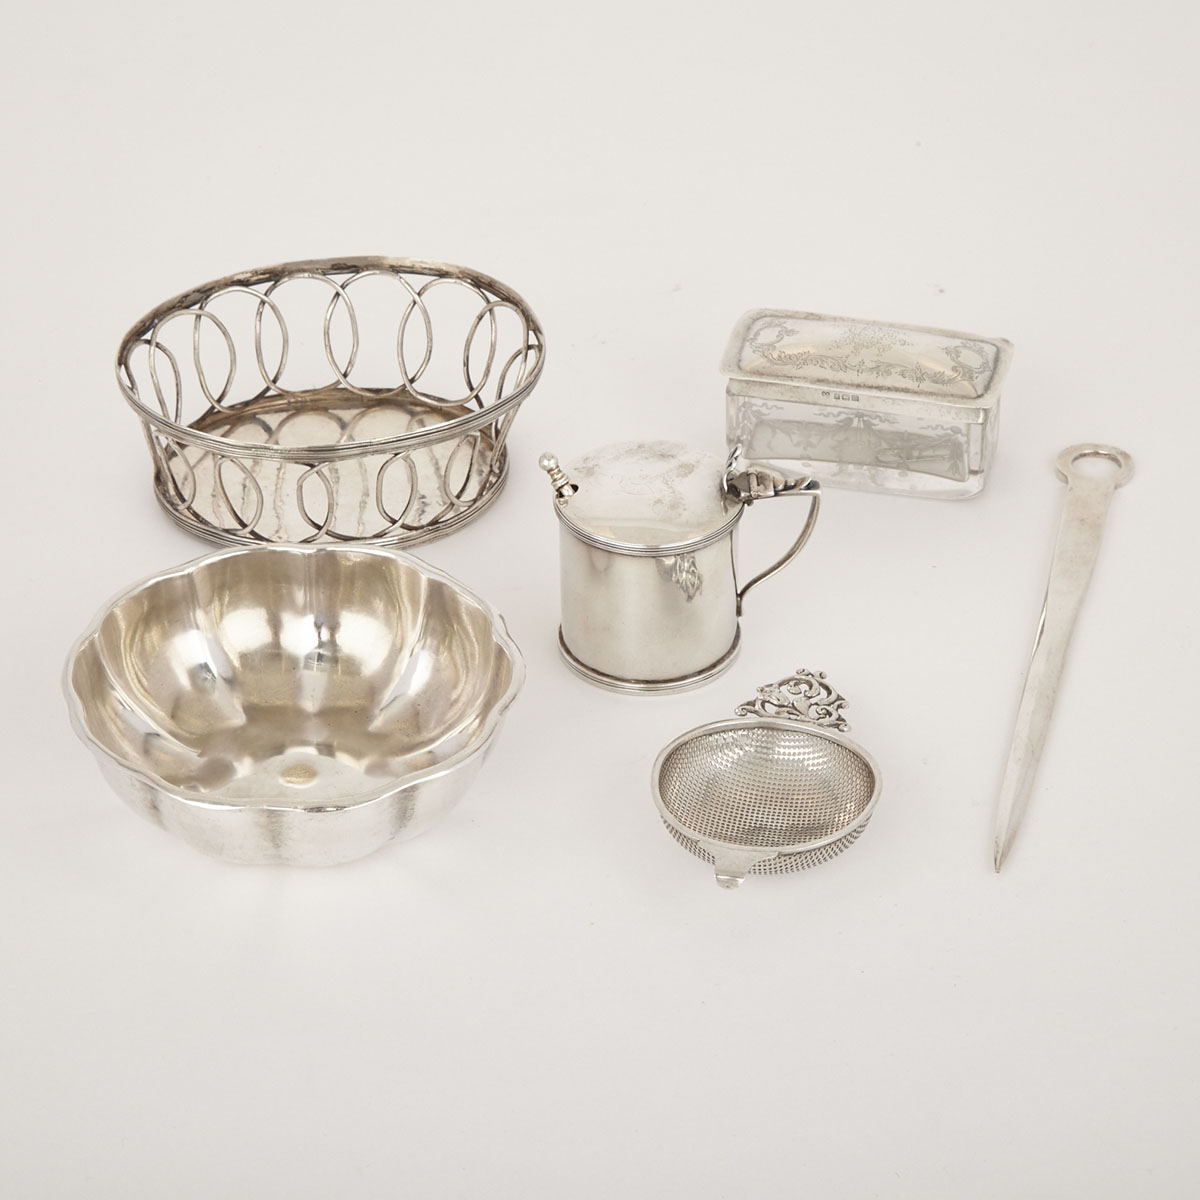 Grouped Lot of English, Dutch and American Silver, 20th century